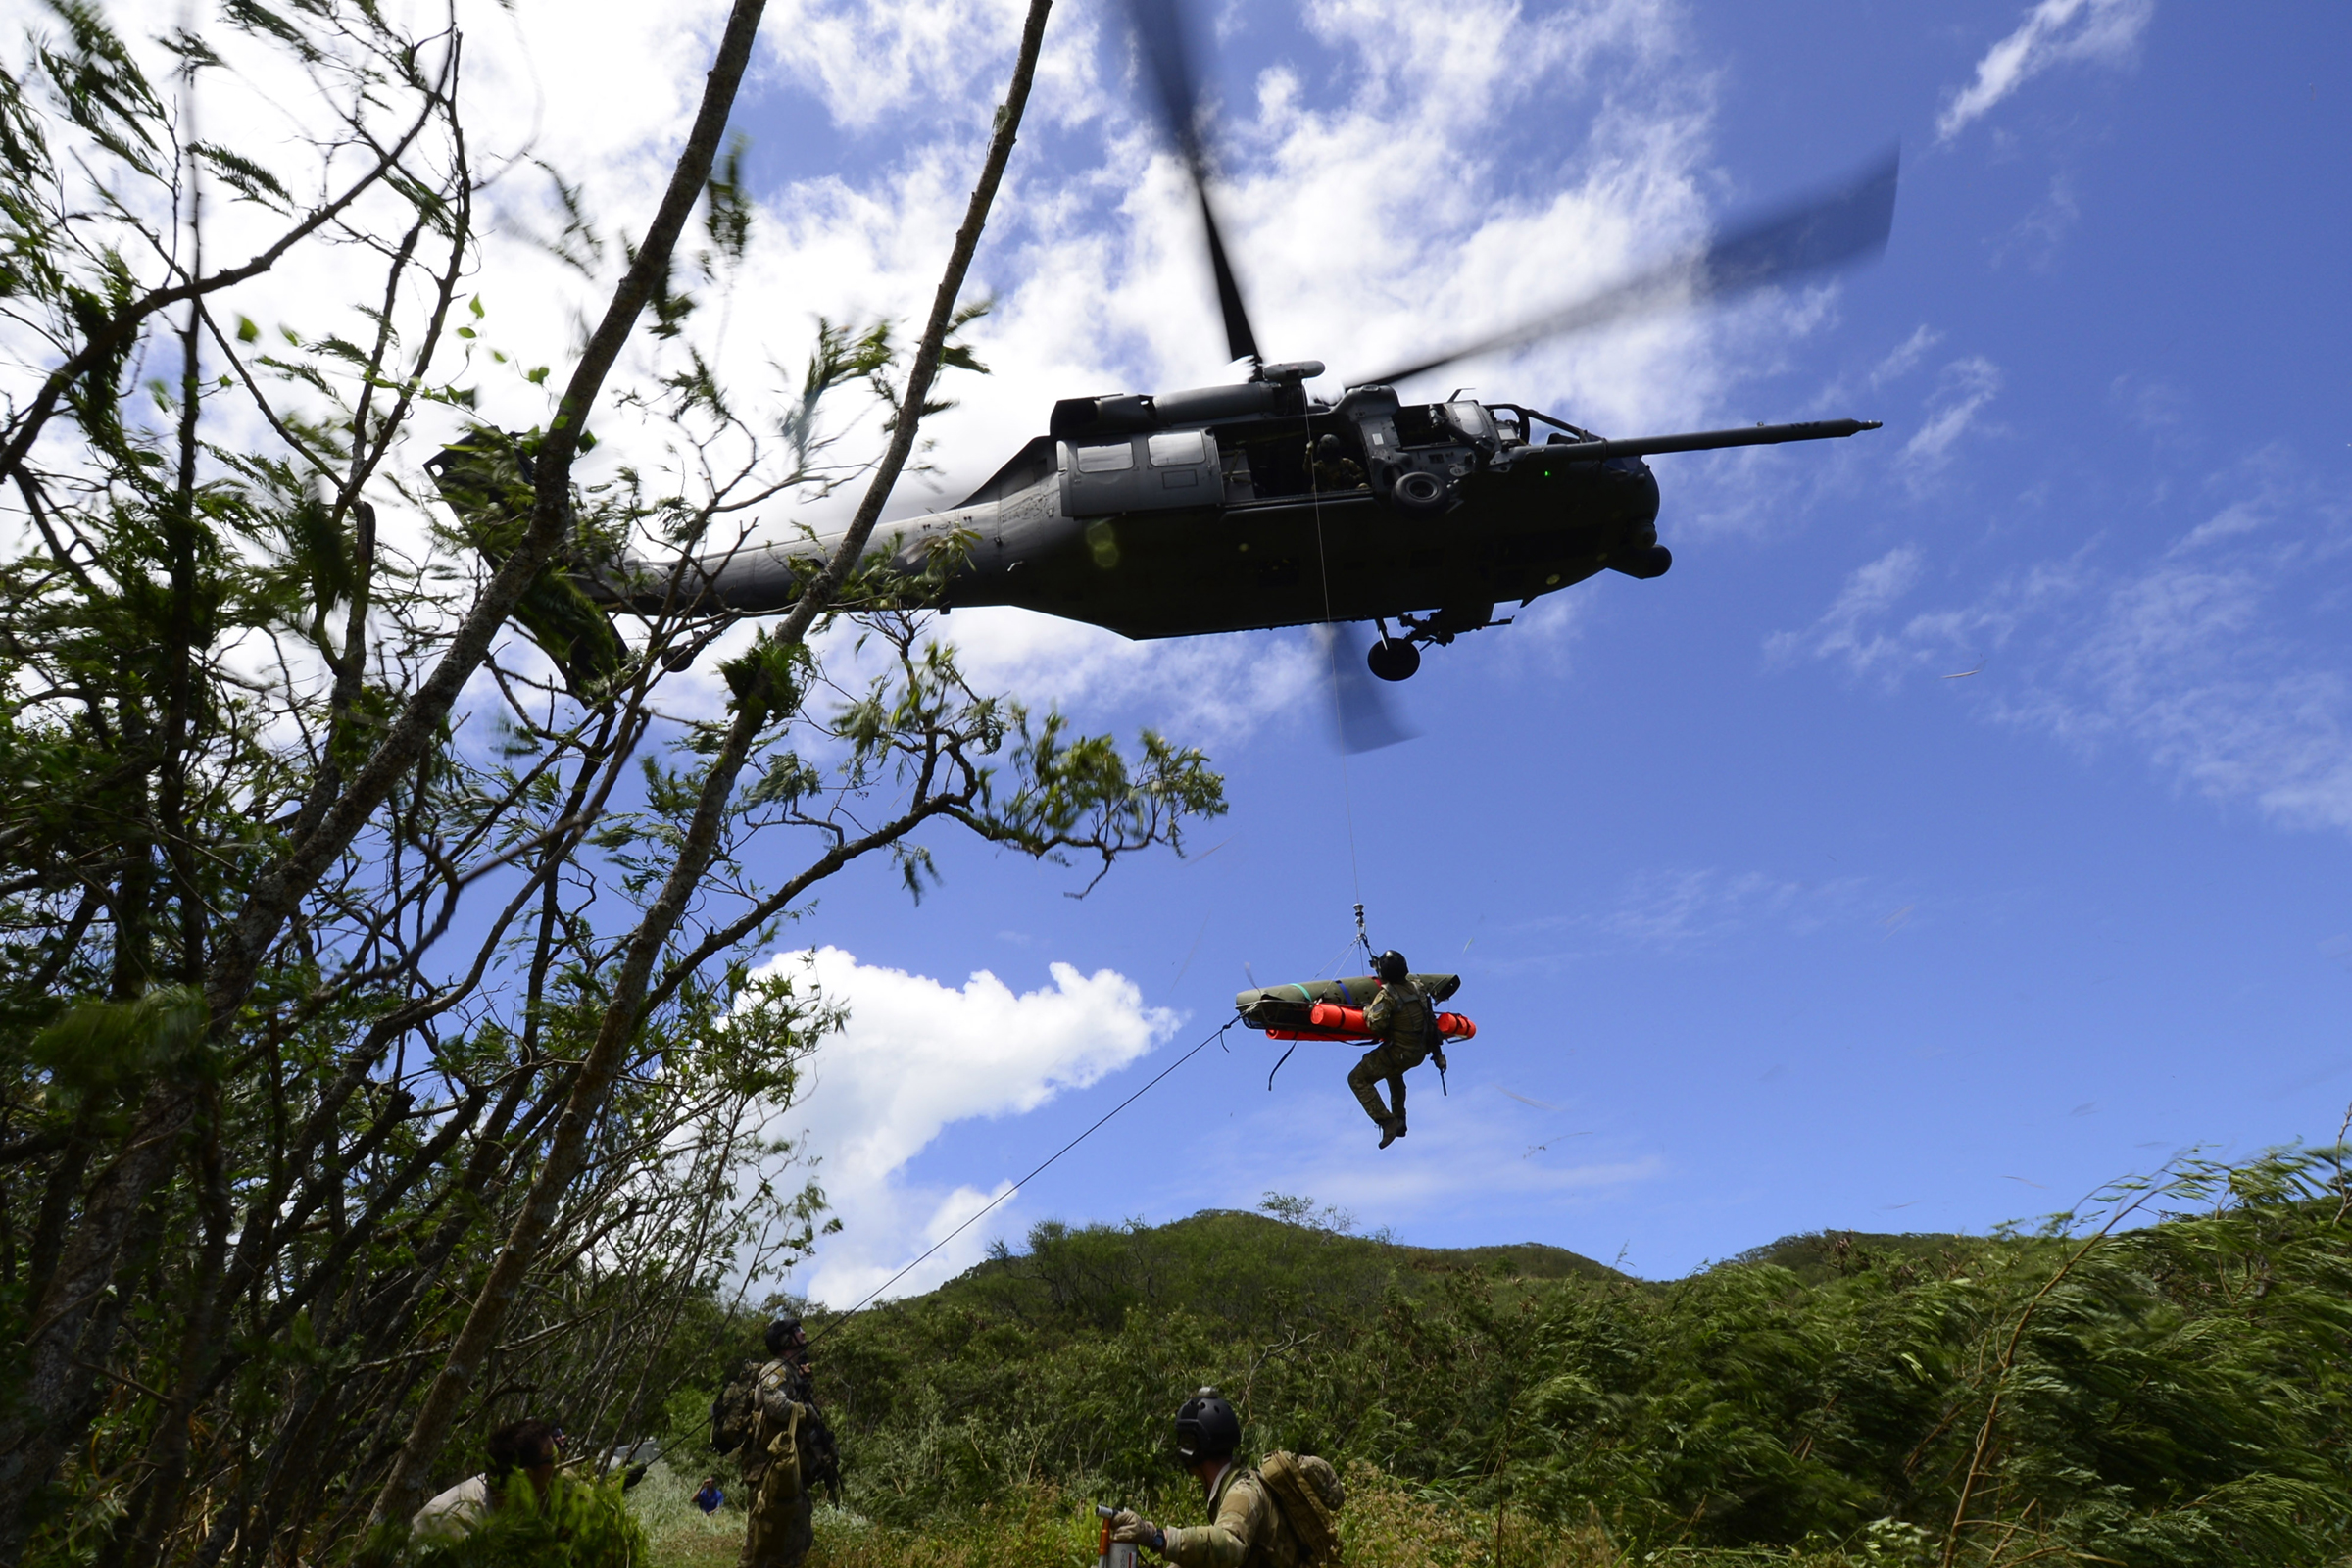 A rescue helicopter hovers above lush, hilly terrain. A man in a helmet descends from a cable with big packs of supplies to join 2 pararescuemen below.